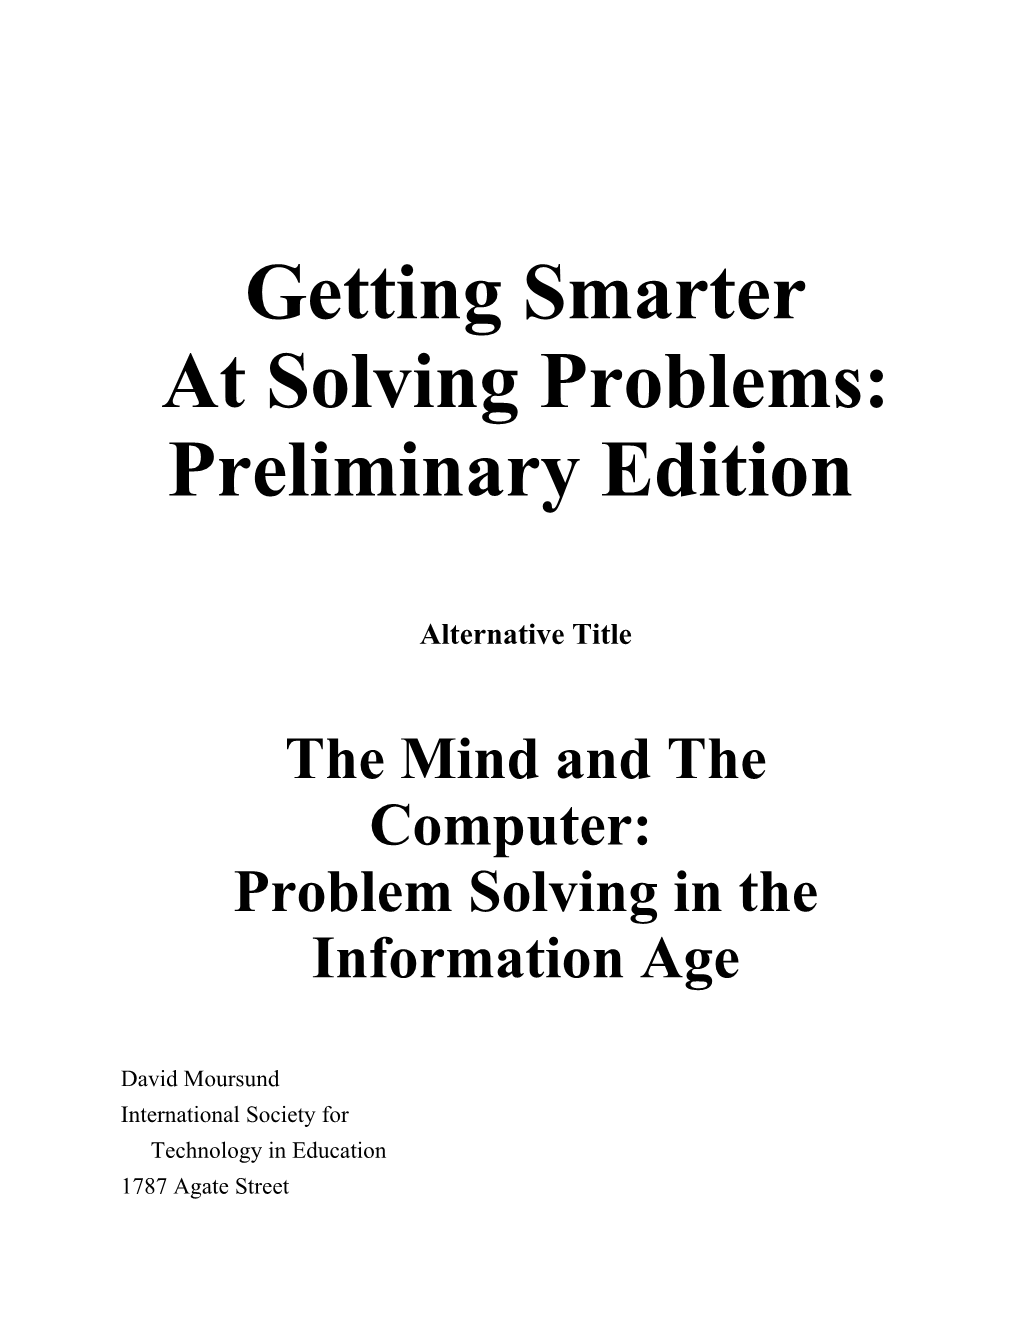 At Solving Problems: Preliminary Edition